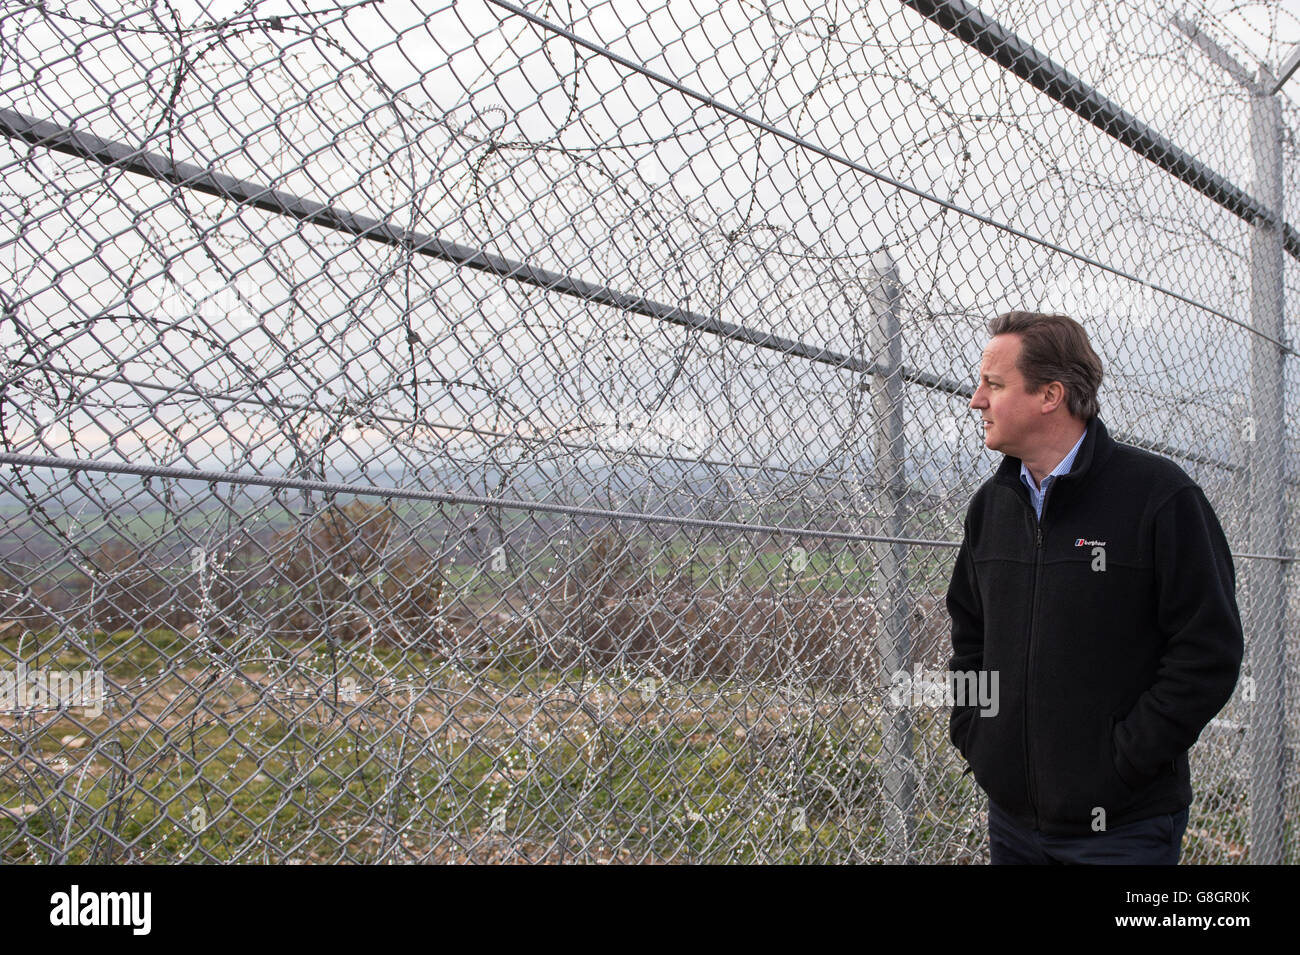 Prime Minister David Cameron visits Bulgaria's border with Turkey near the Lesovo crossing point, where he saw the enhanced efforts to secure the European Union's external frontiers. Stock Photo